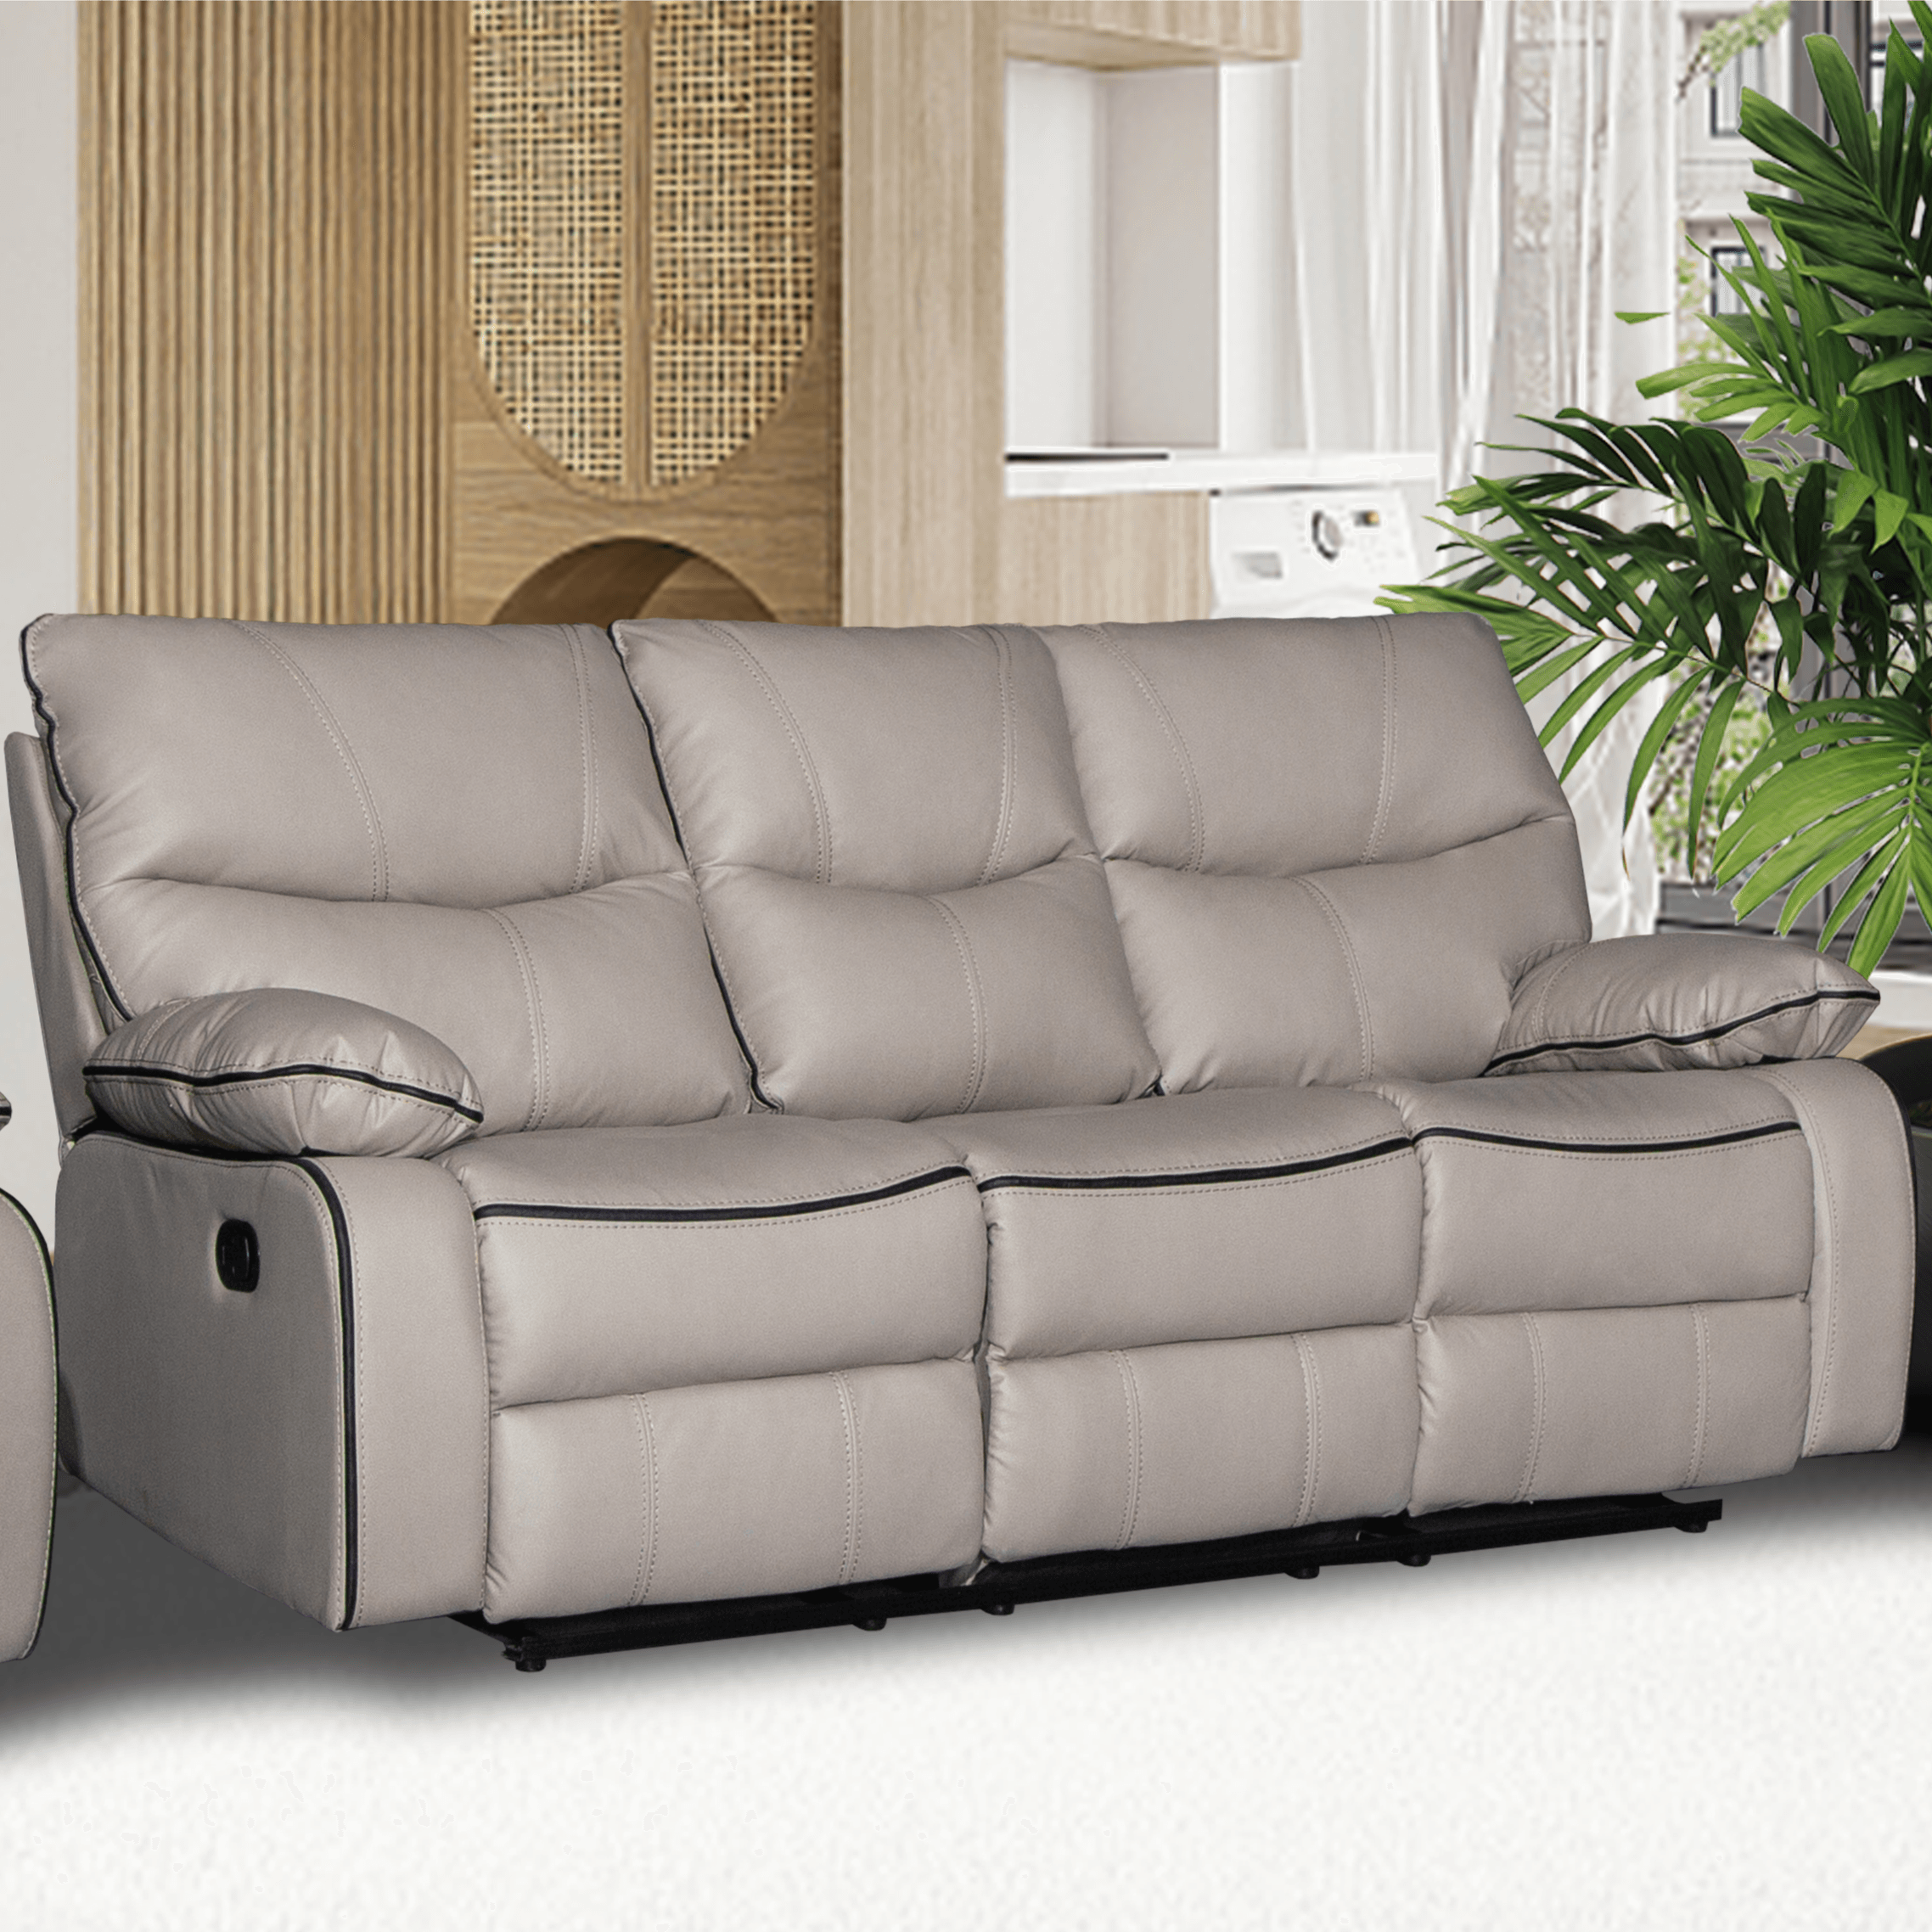 Brooke 3 Seater Recliner Lounge in Crème waterproof fabric. Comfortable seating with manual recline and cup holders.